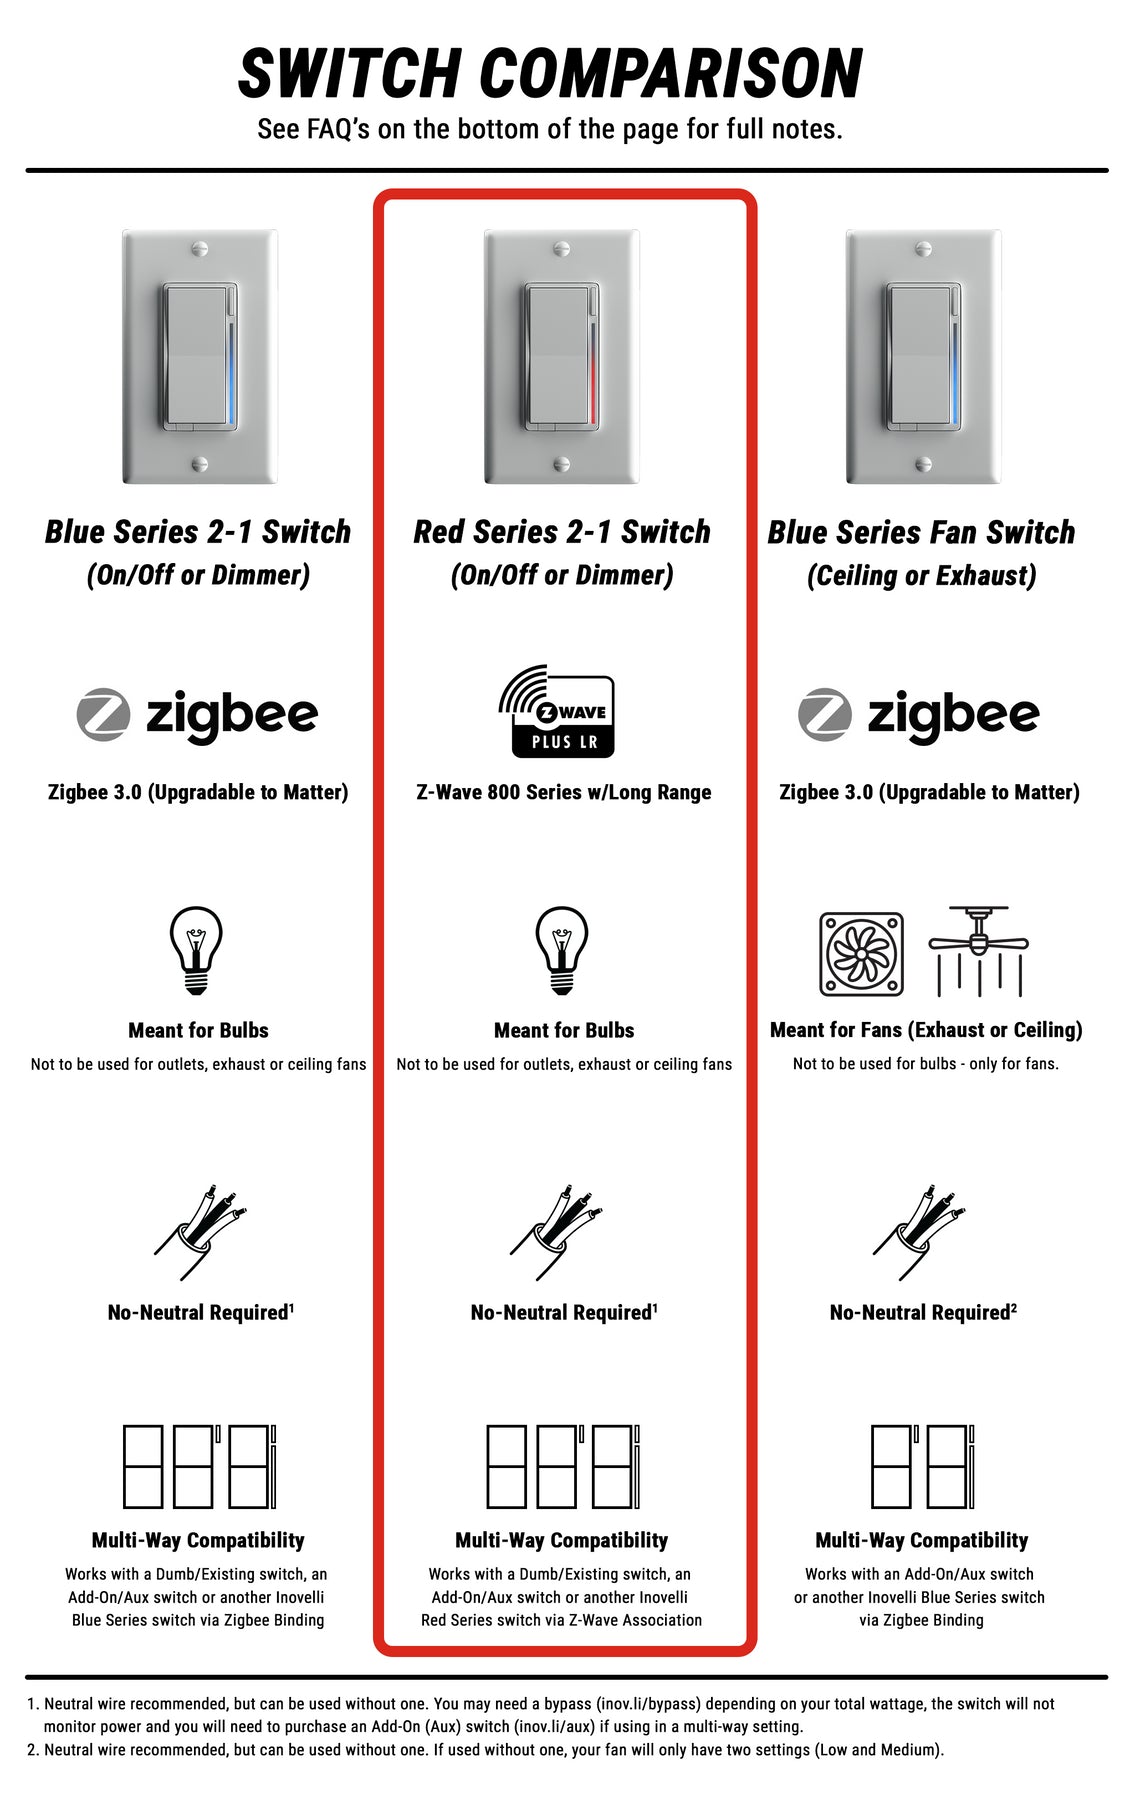 Inovelli Red Series 2-1 Smart Switch and Dimmer; Z-Wave Plus V2 (VZW31)